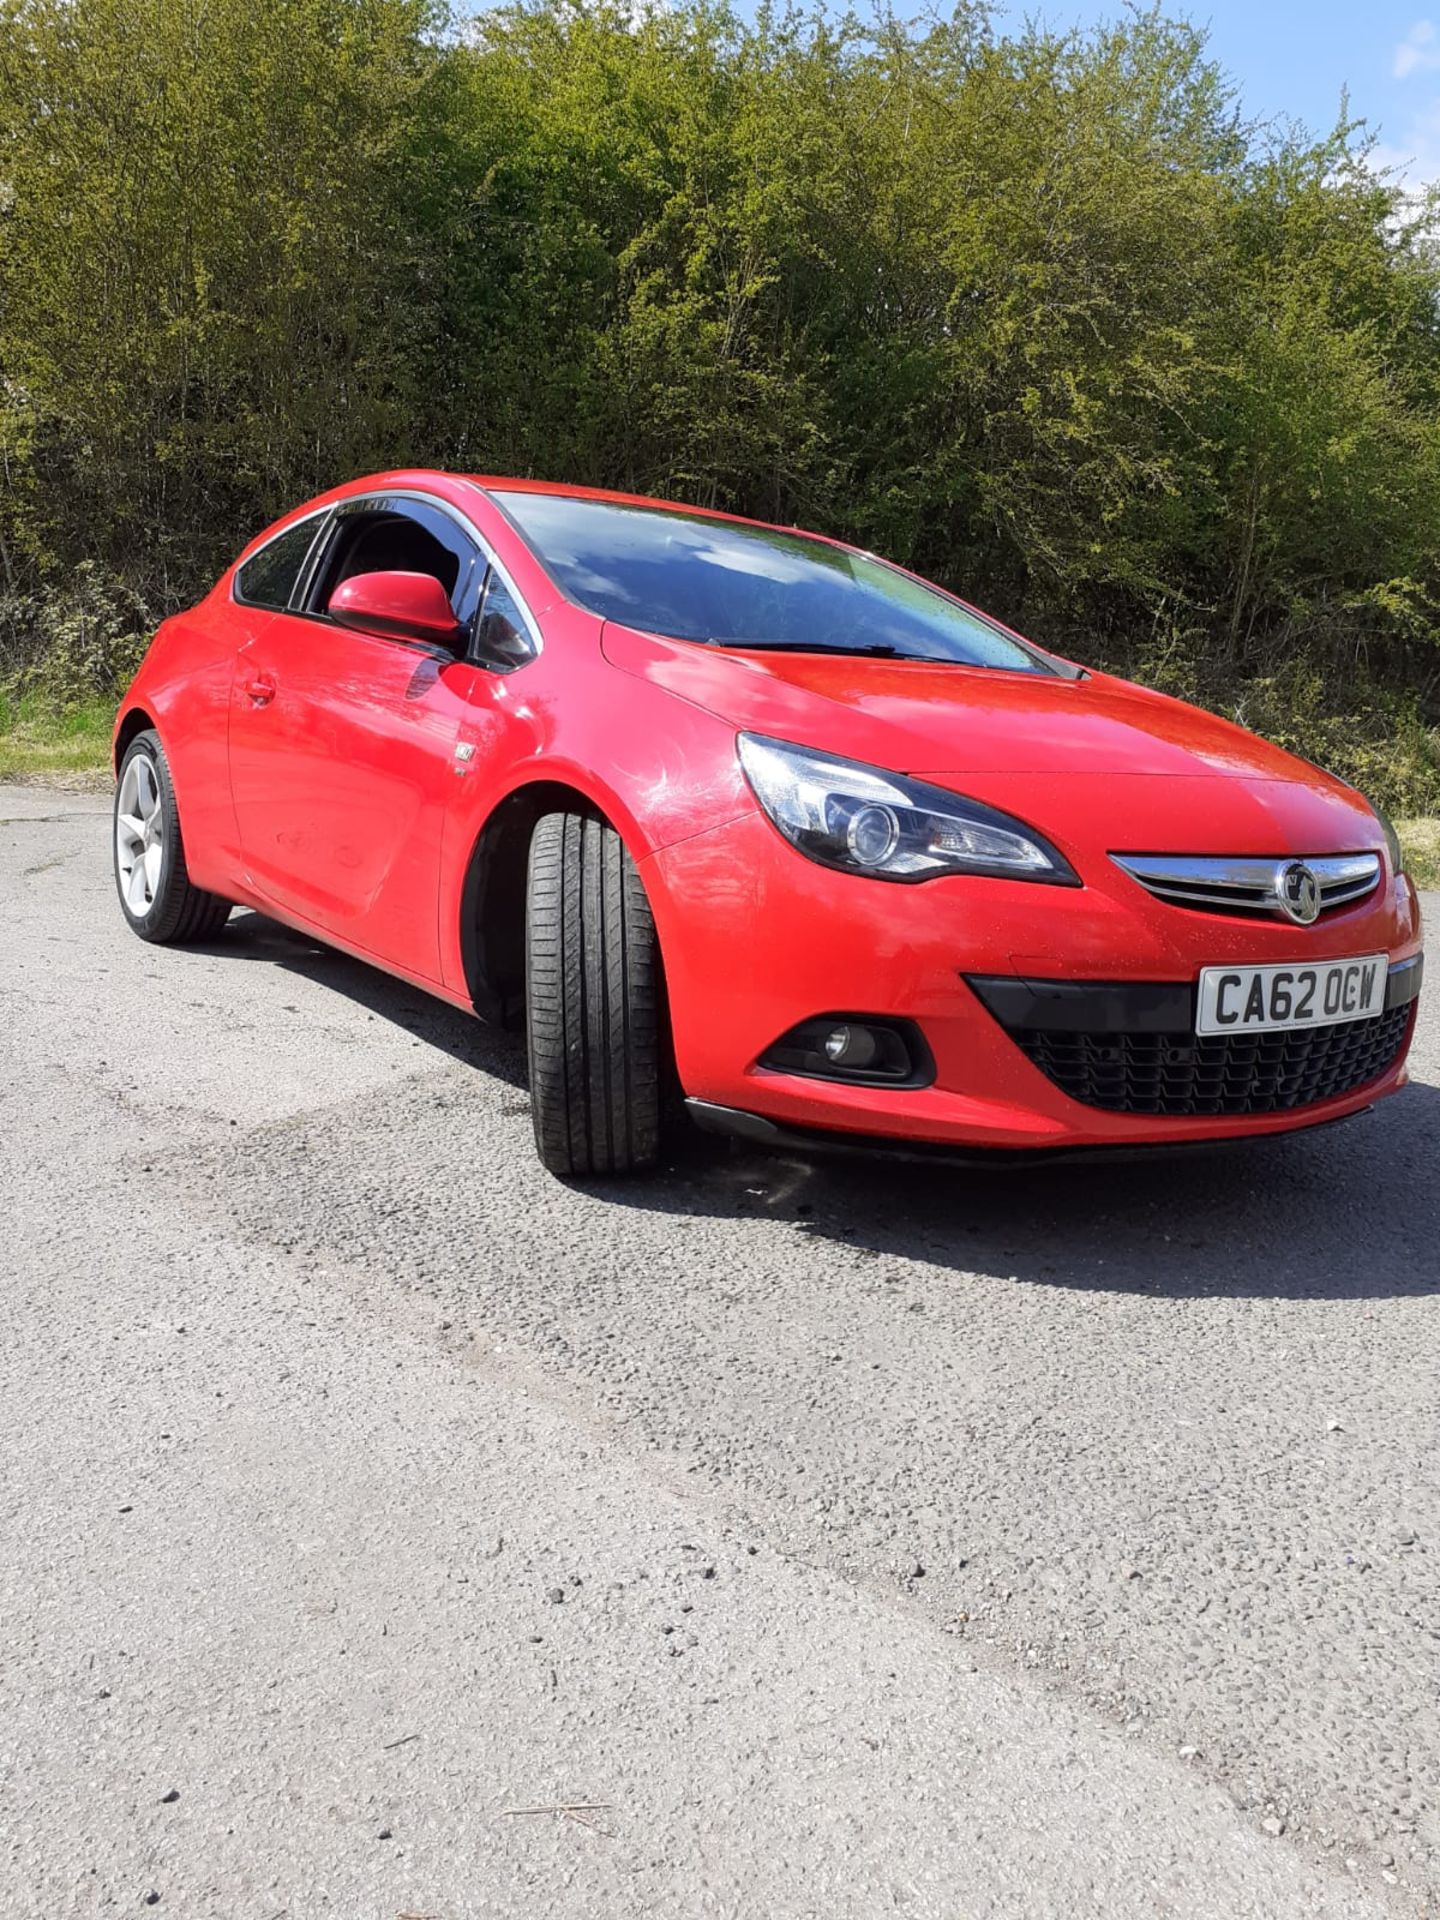 2013 VAUXHALL ASTRA GTC SRI CDTI S/S, 3 DOOR HATCHBACK, SHOWING 3 PREVIOUS KEEPERS, DIESEL ENGINE - Image 4 of 16